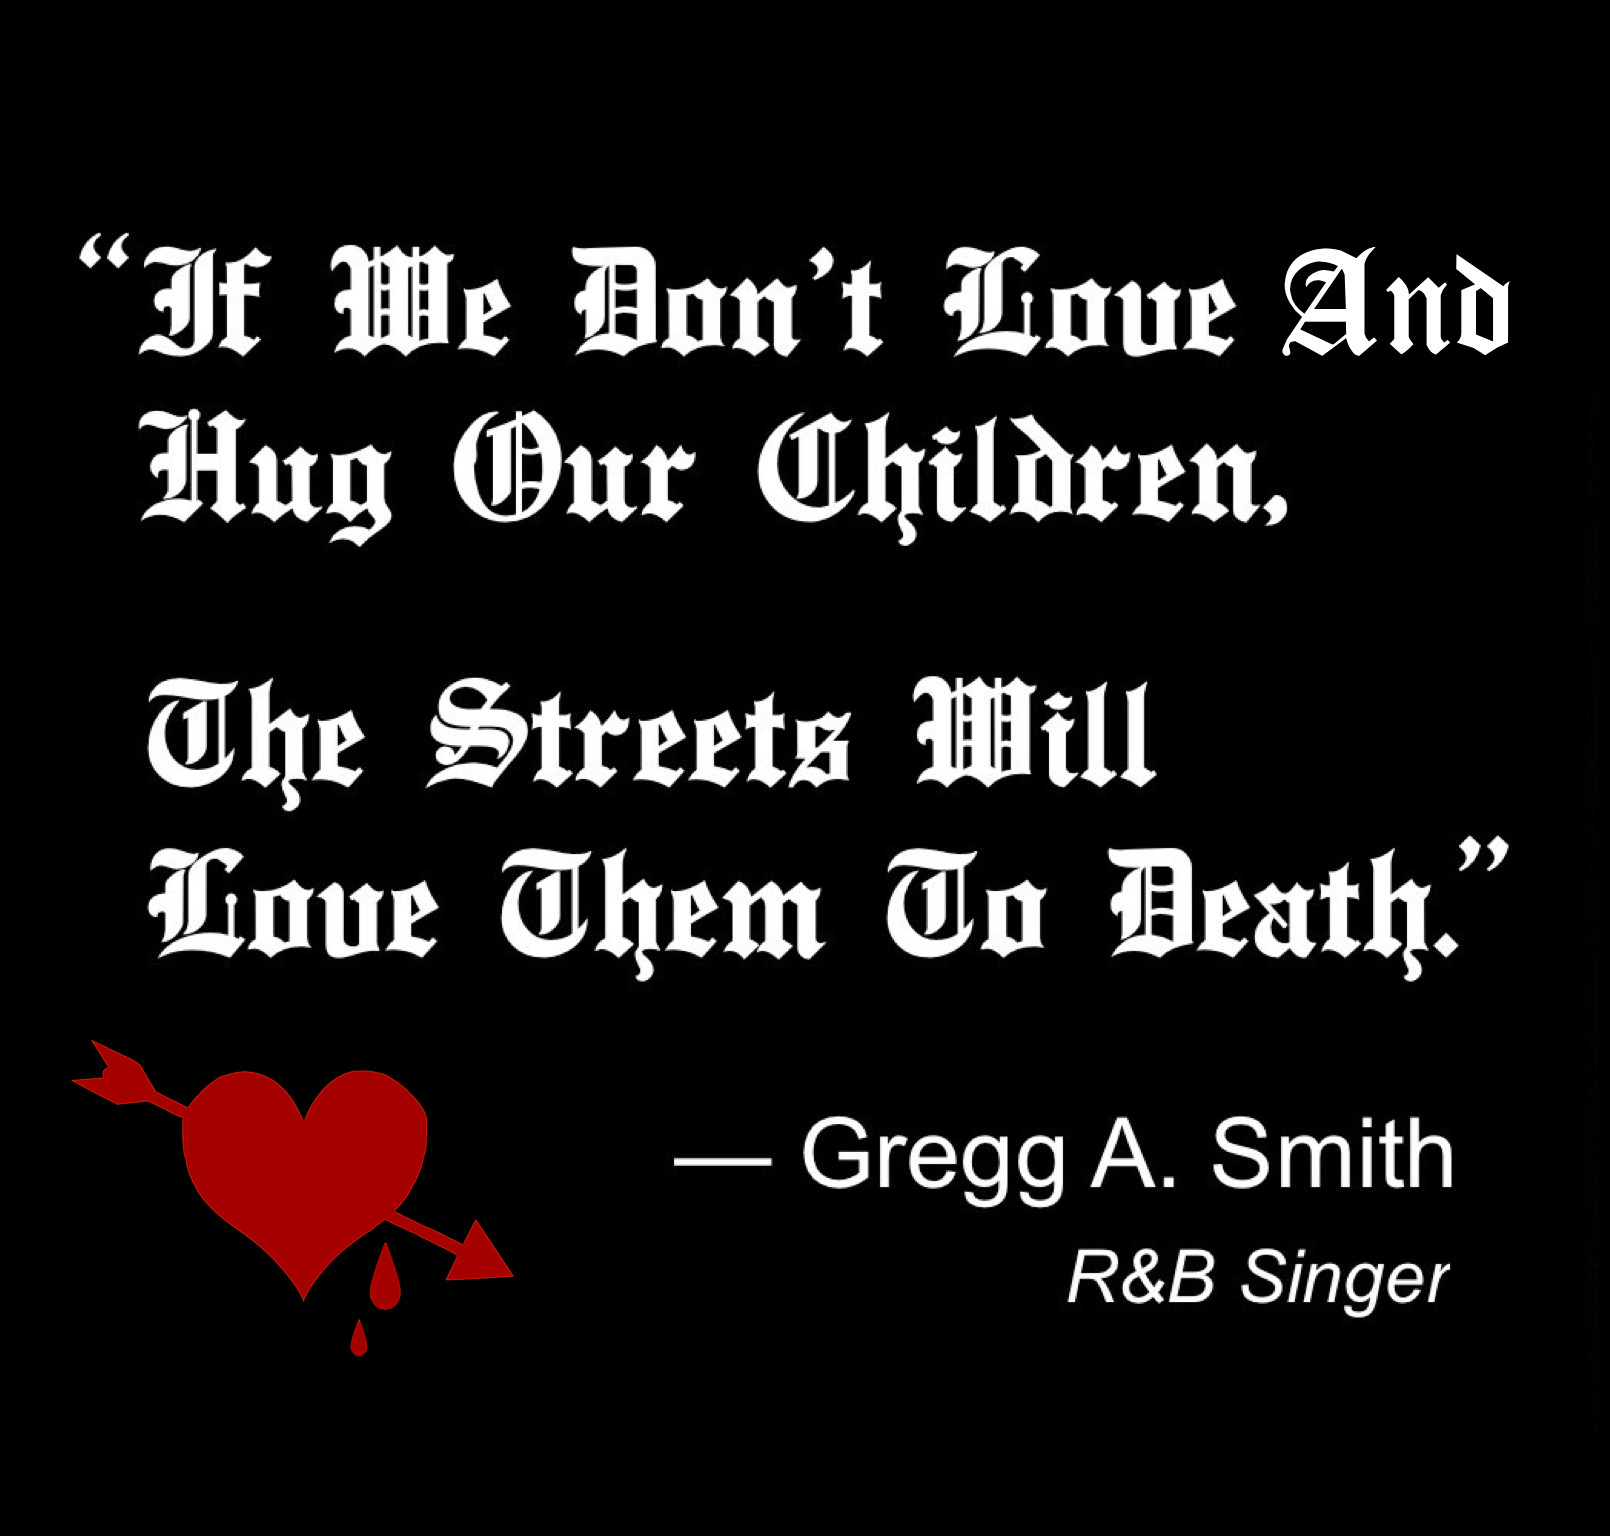 The Streets Will Love Them To Death Quote Meme Blank Meme Template